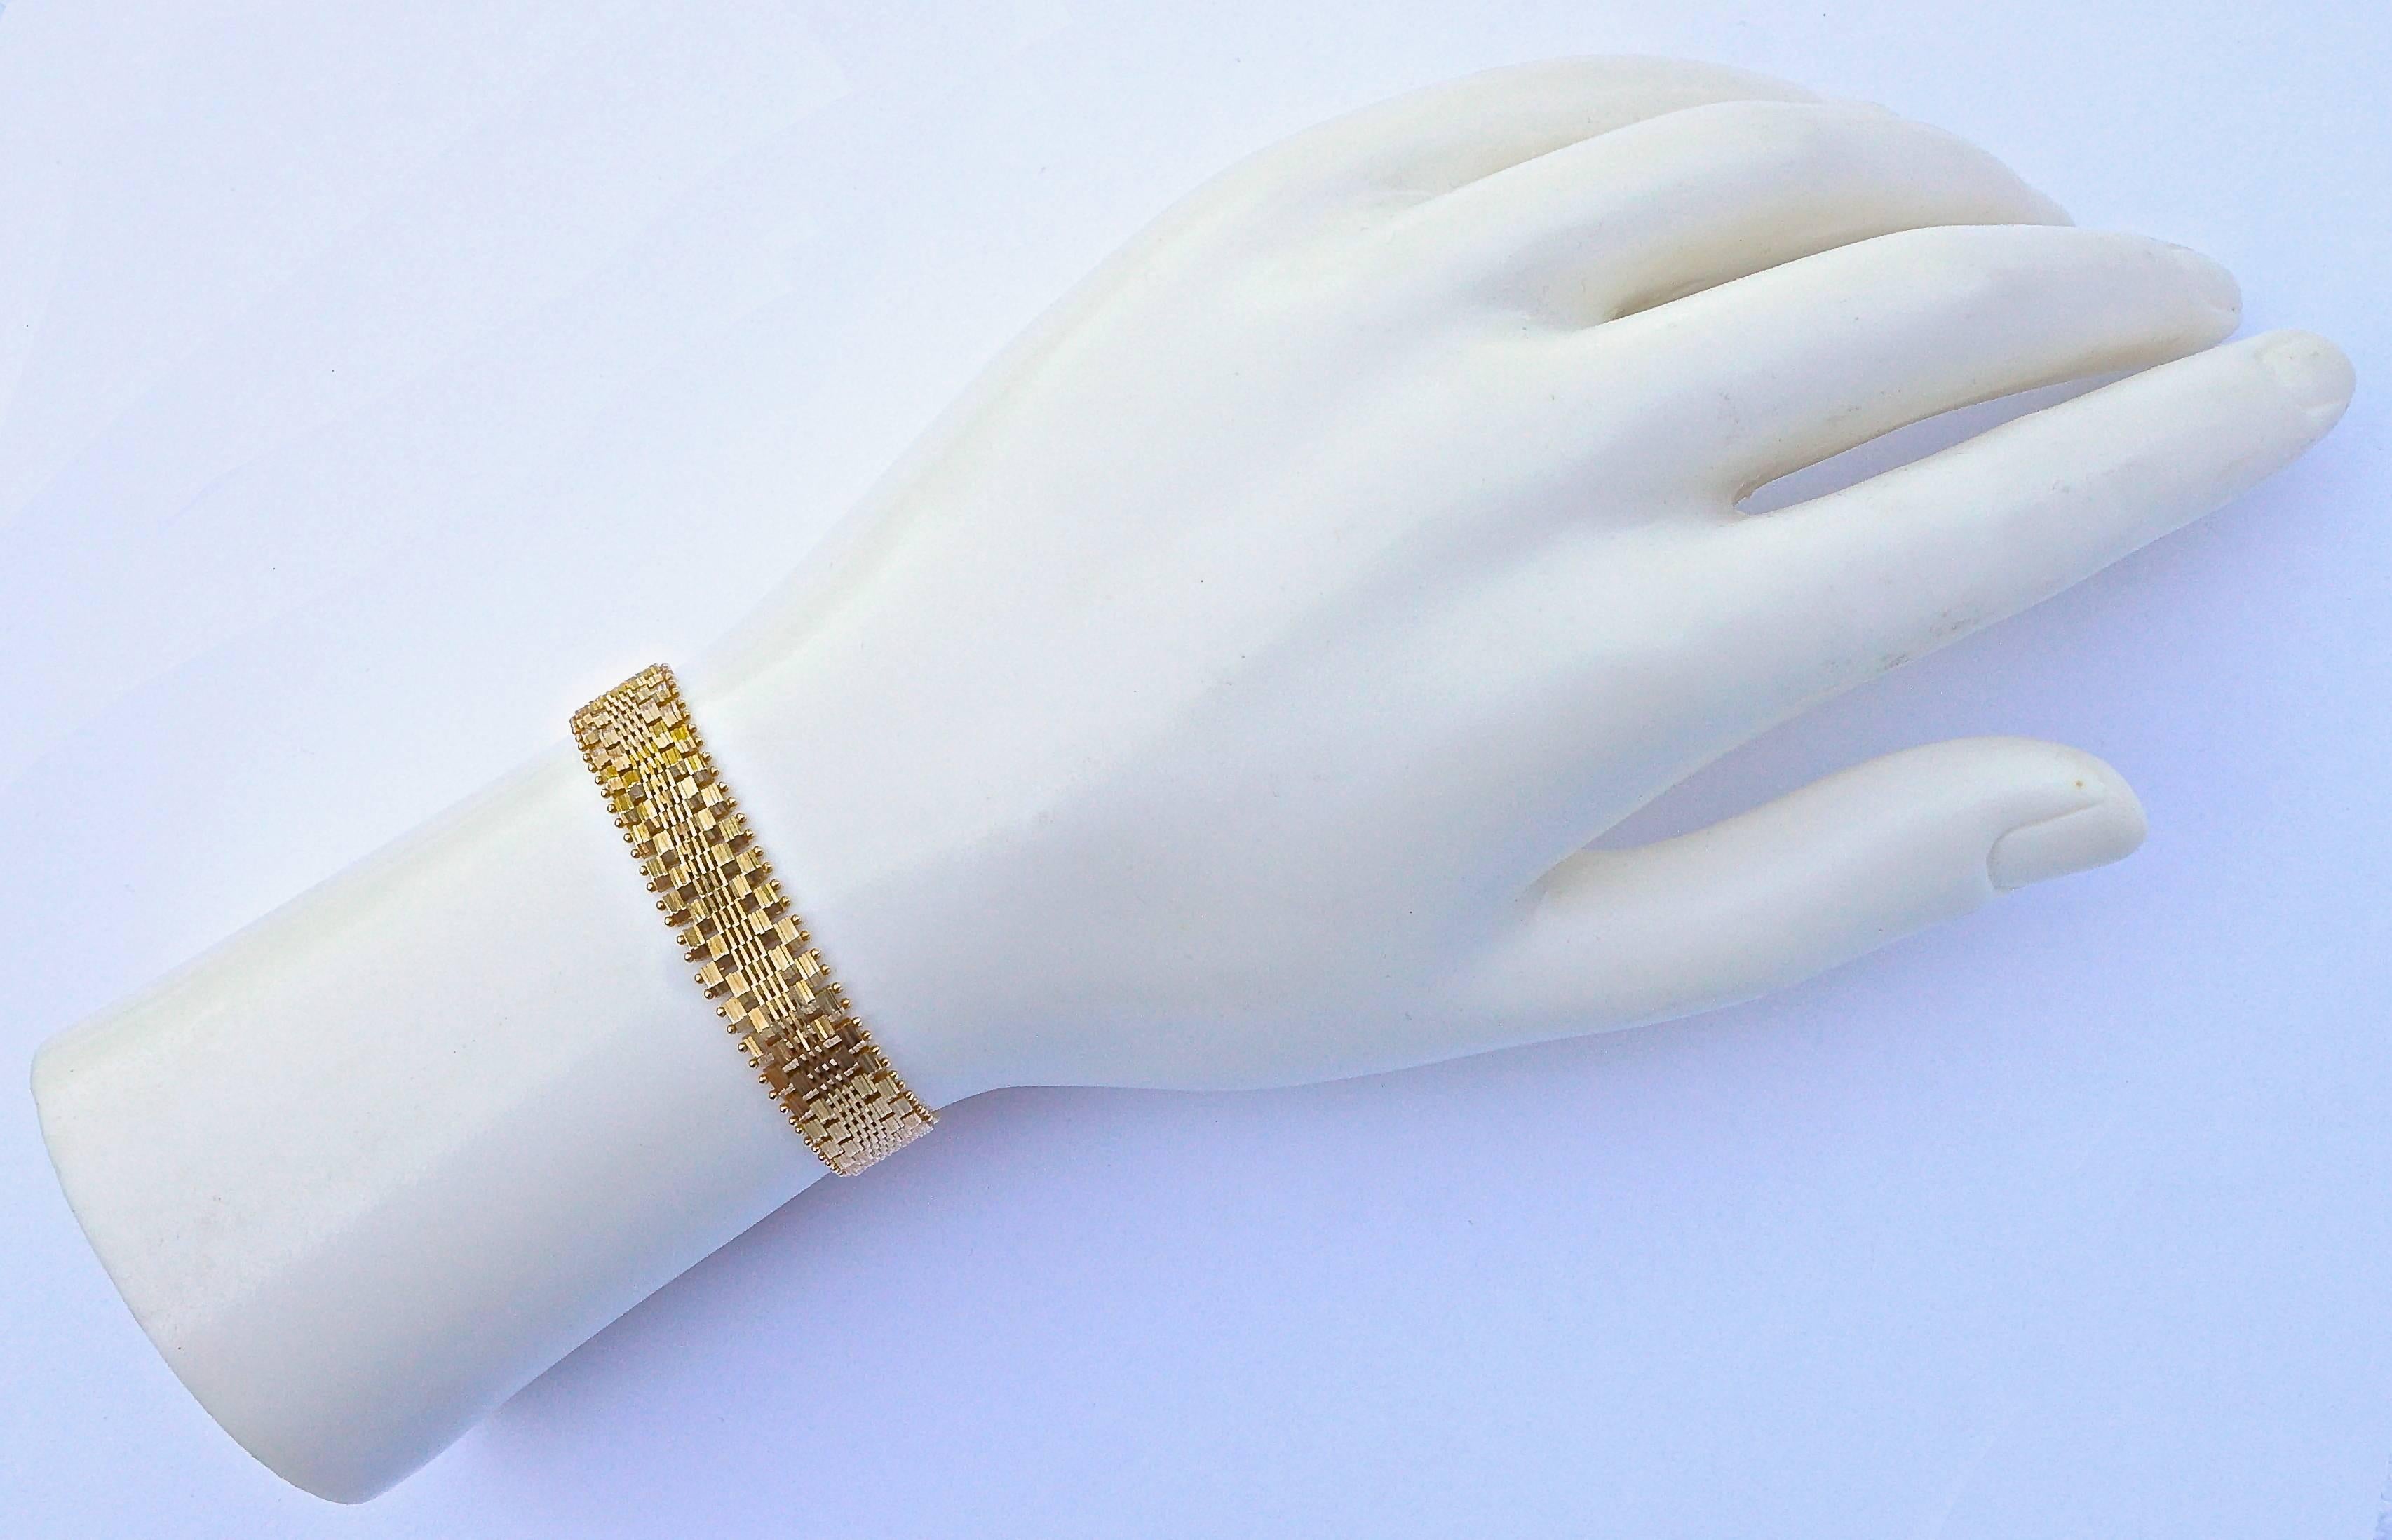 Fine 14K gold bracelet by Imperial Gold, with a safety hook. It has a beautiful mirrored link design edged with gold balls. The front is textured and the back is flat. Measuring length 18.5cm / 7.29 inches by width 1cm / .39 inch. The clasp is